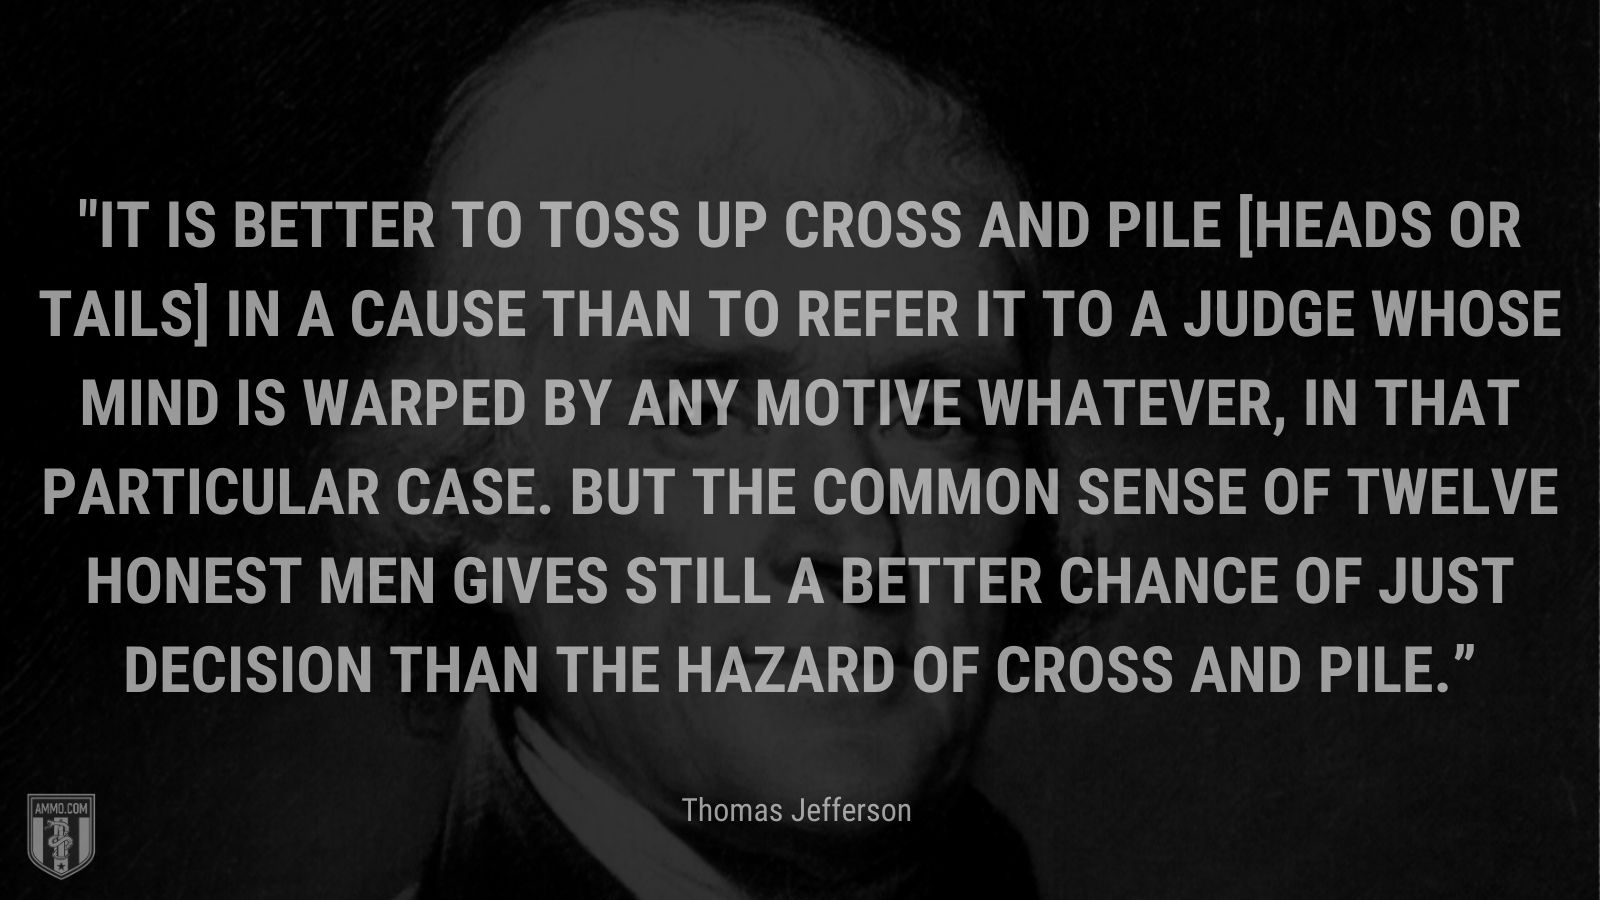 “It is better to toss up cross and pile [heads or tails] in a cause than to refer it to a judge whose mind is warped by any motive whatever, in that particular case. But the common sense of twelve honest men gives still a better chance of just decision than the hazard of cross and pile.” - Thomas Jefferson